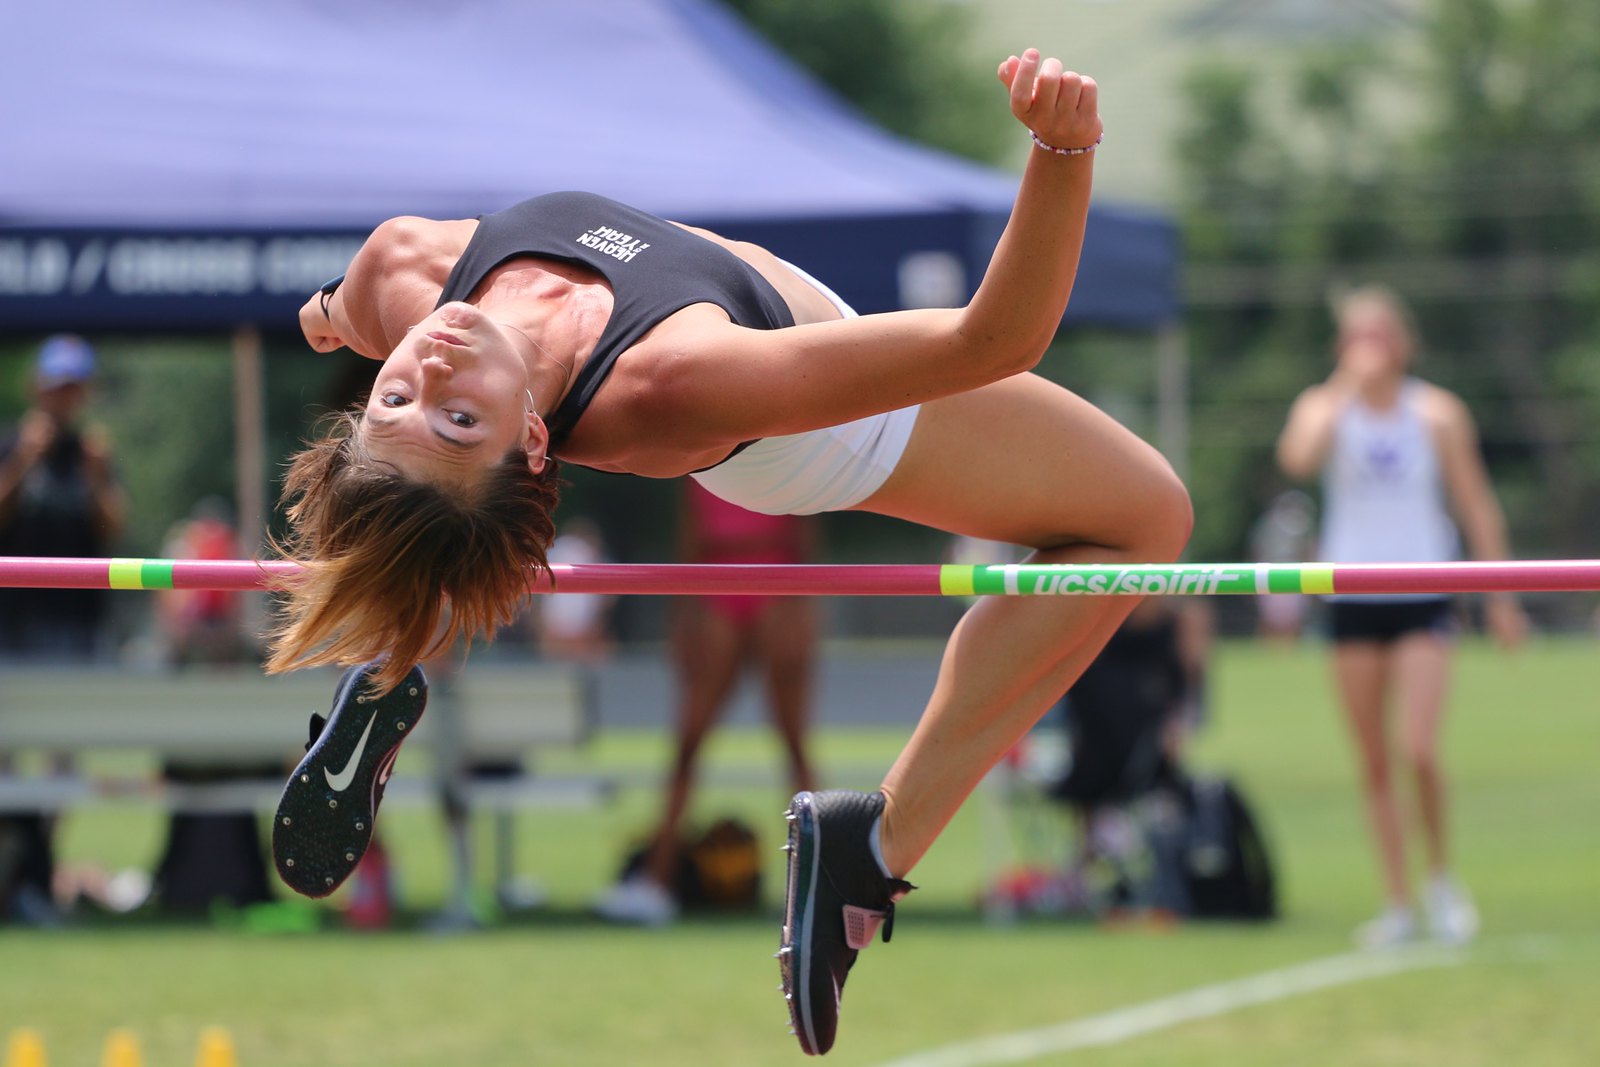 A female athlete competing in the high jump event clears the bar.